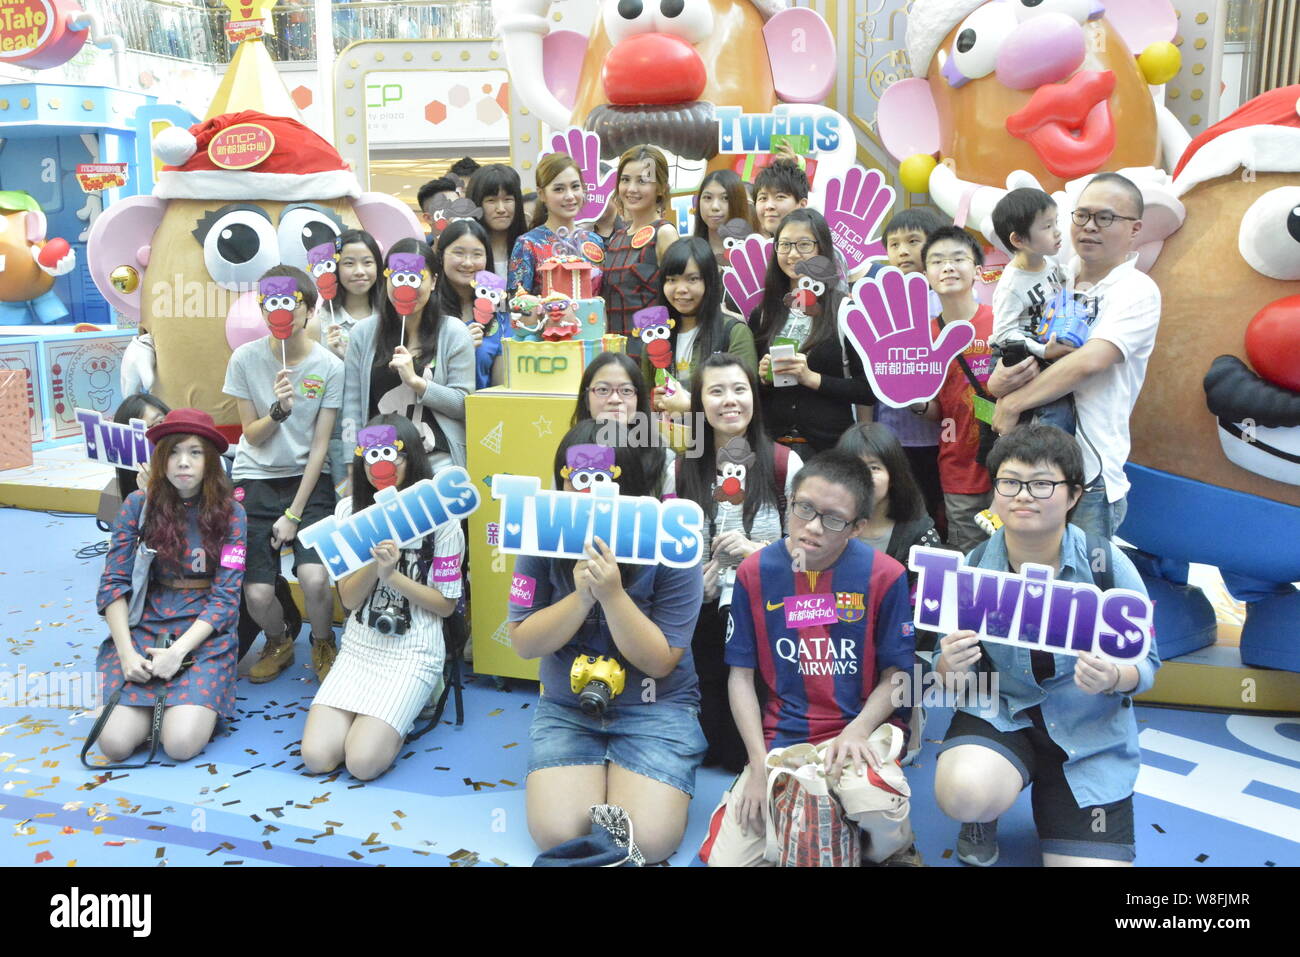 Gillian Chung, center left, and Charlene Choi, center right, of Hong Kong pop duo Twins pose with fans during the opening ceremony of Mr. Potato Head Stock Photo